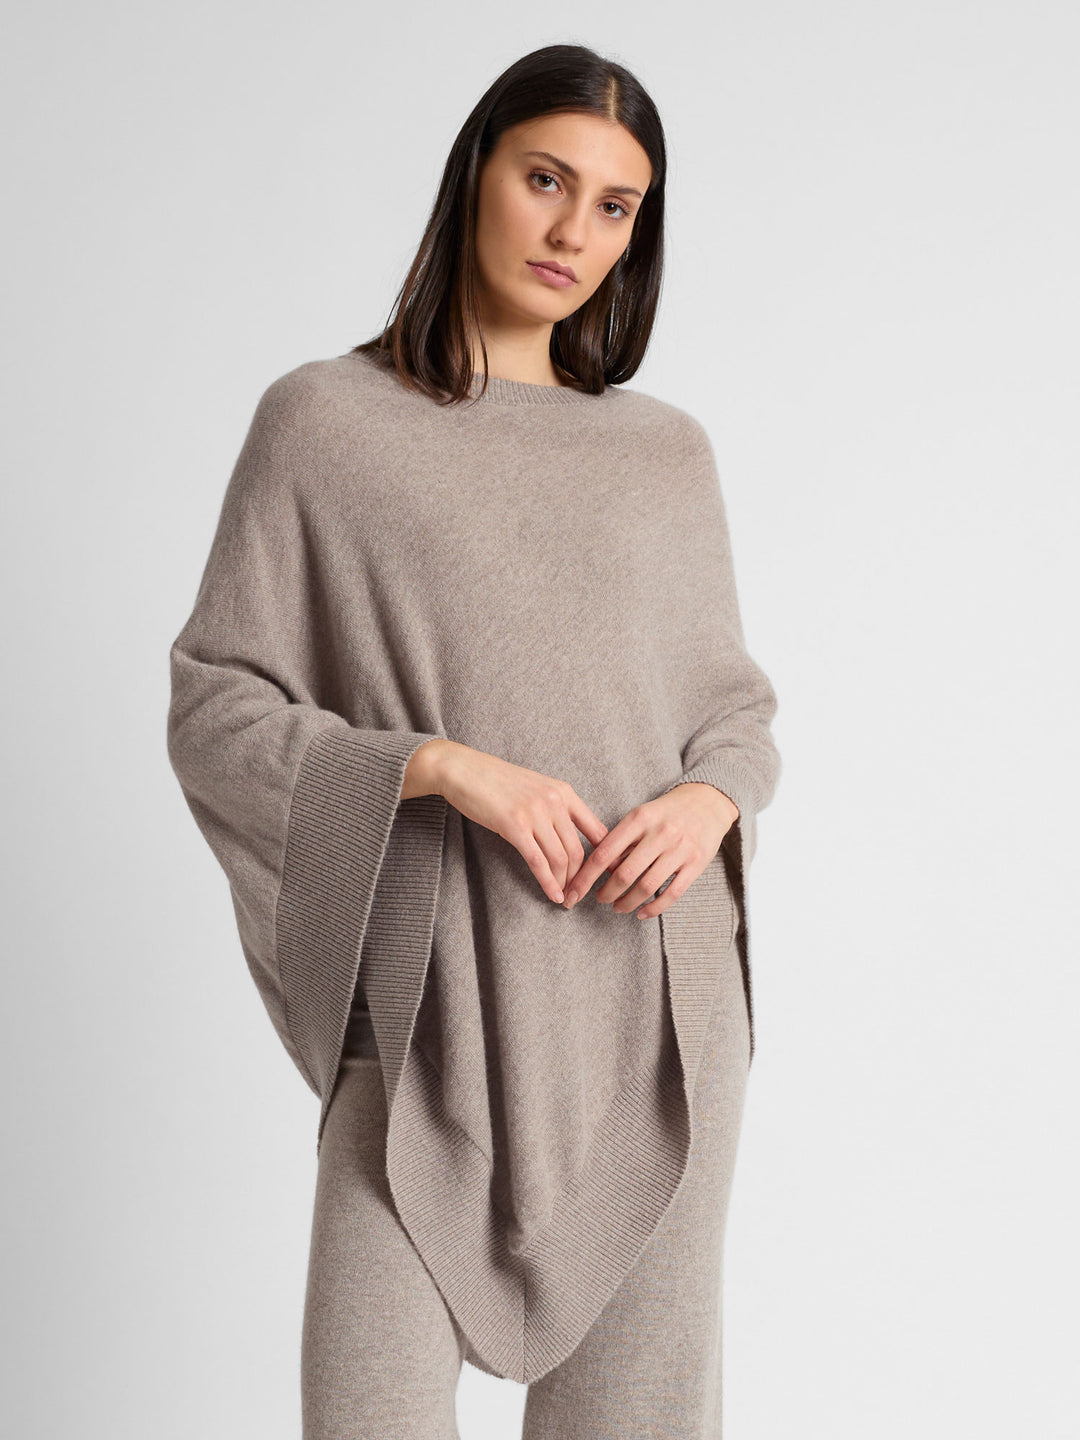 Cashmere poncho "Haddy" in 100% pure cashmere. Scandinavian design by Kashmina. Color: Toast.